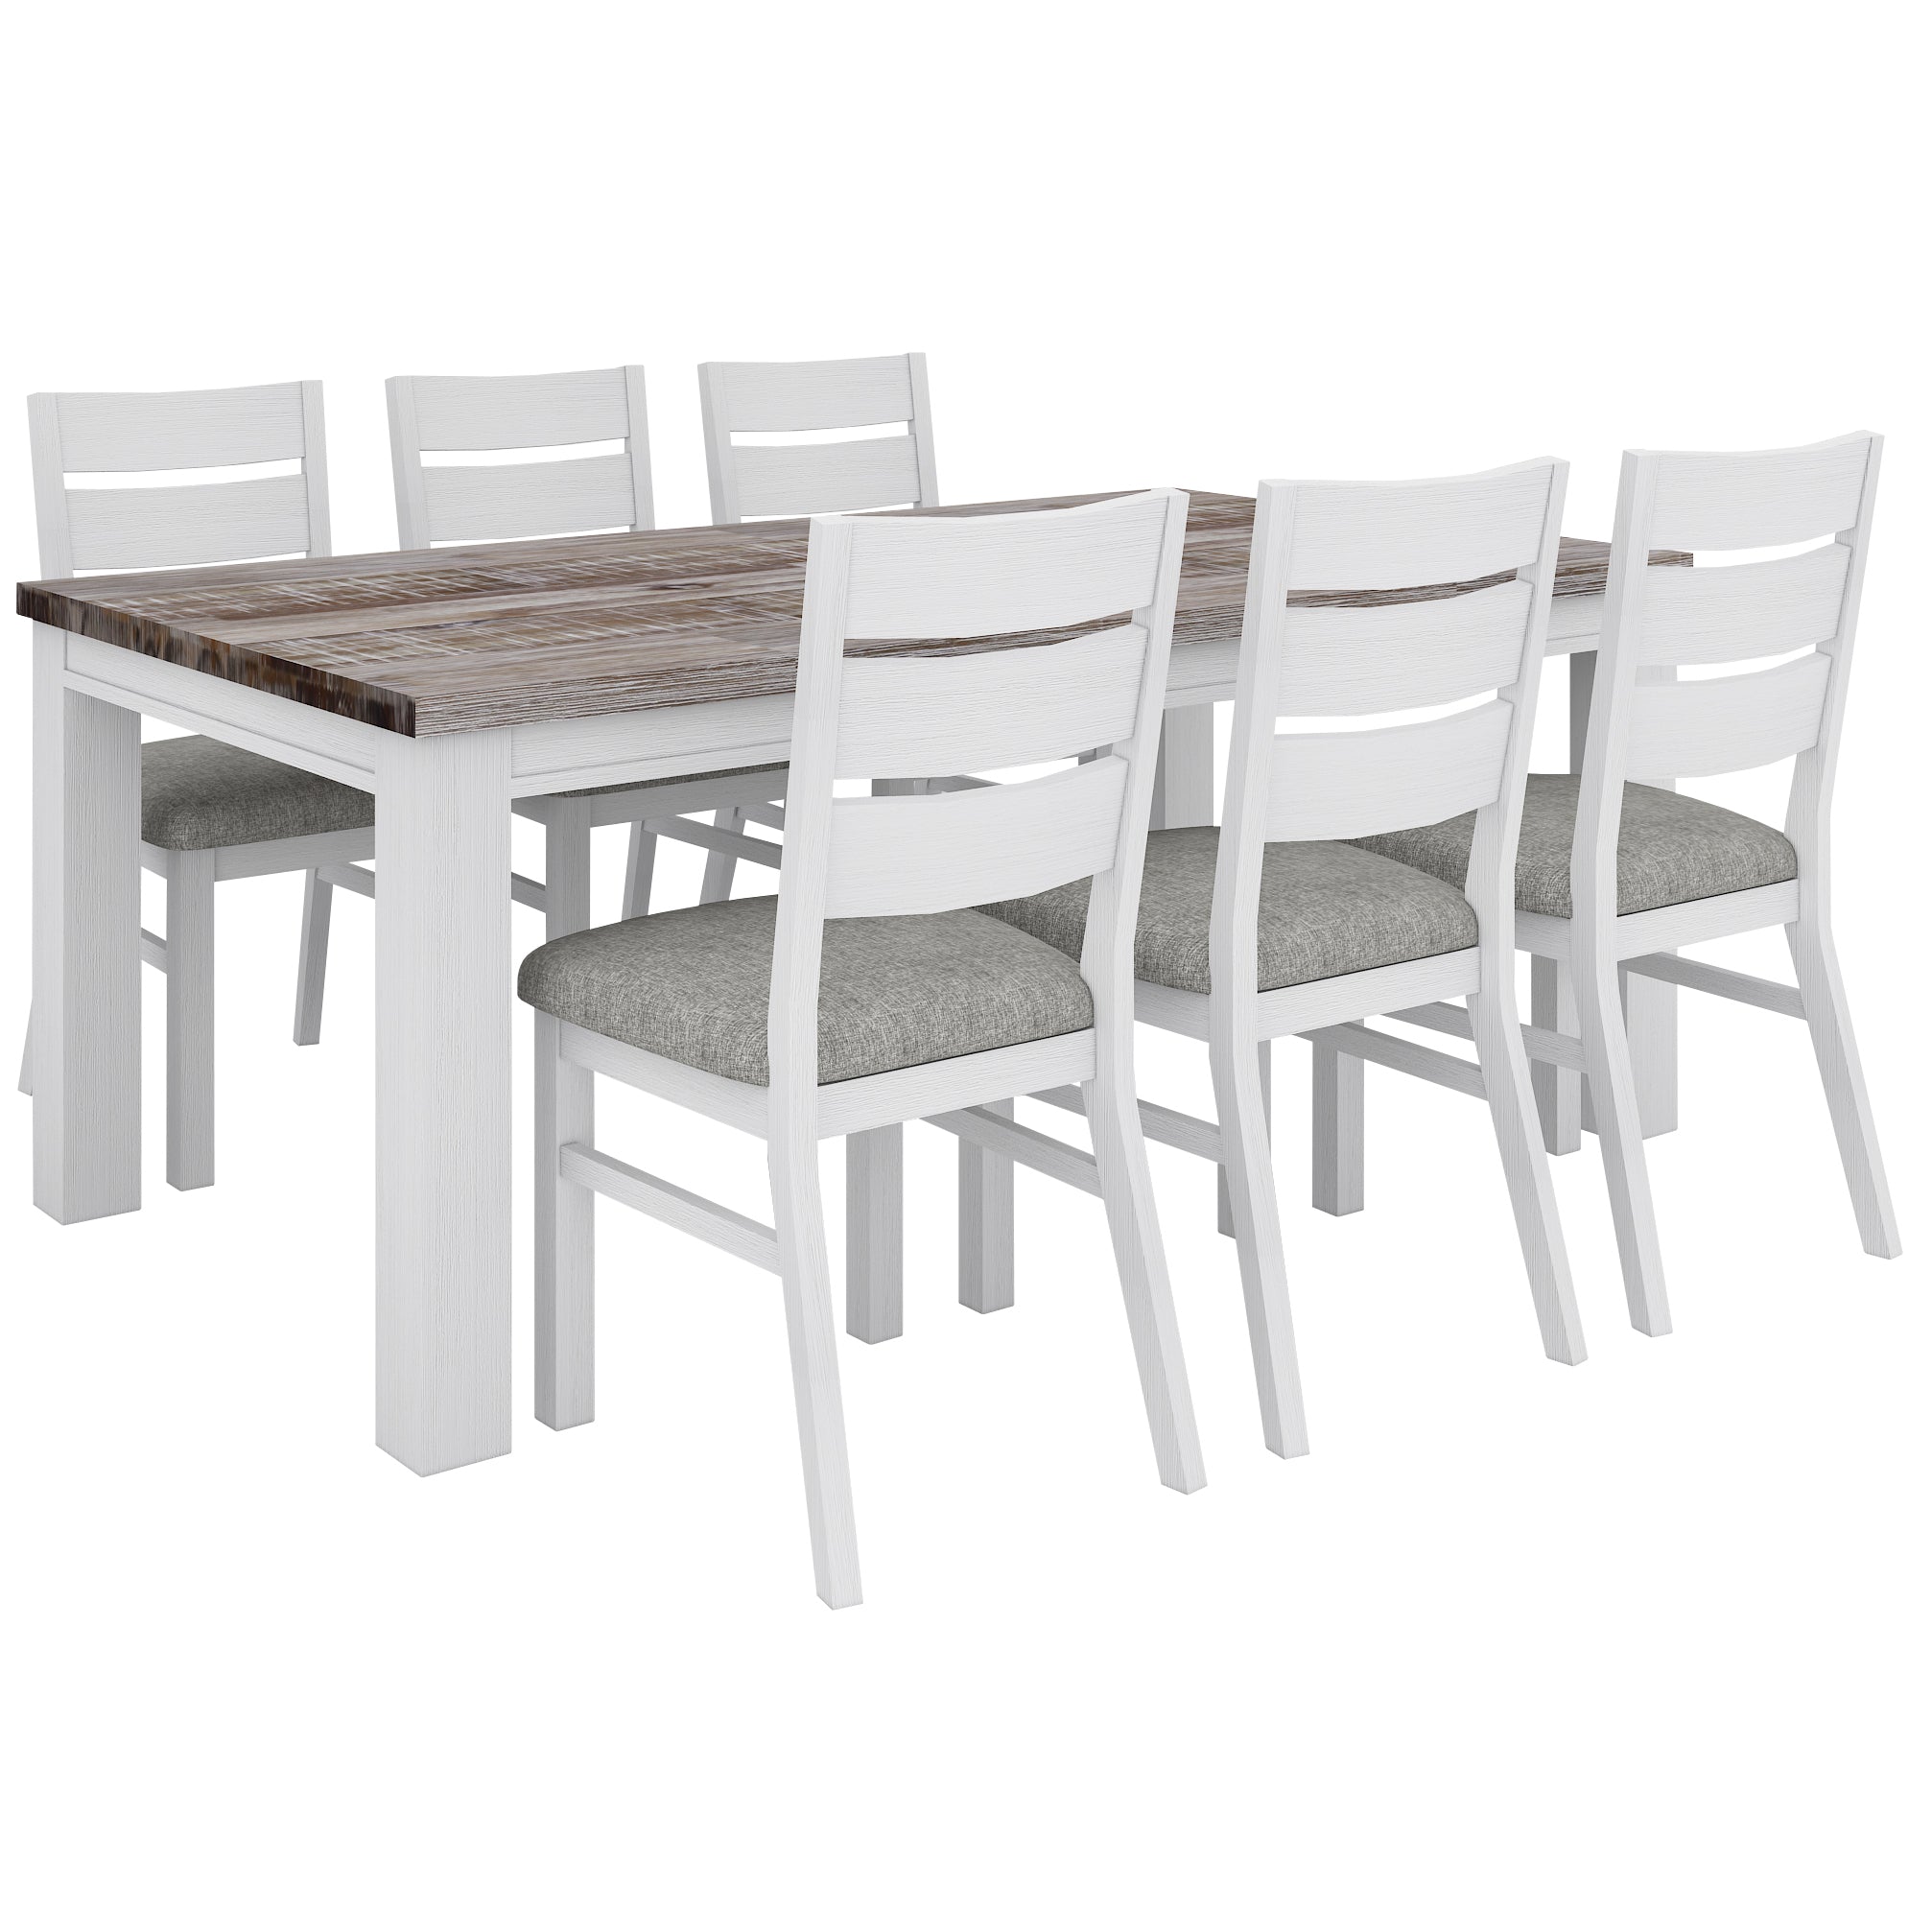 Plumeria Dining Chair Set of 4 Solid Acacia Wood Dining Furniture - White Brush Deals499